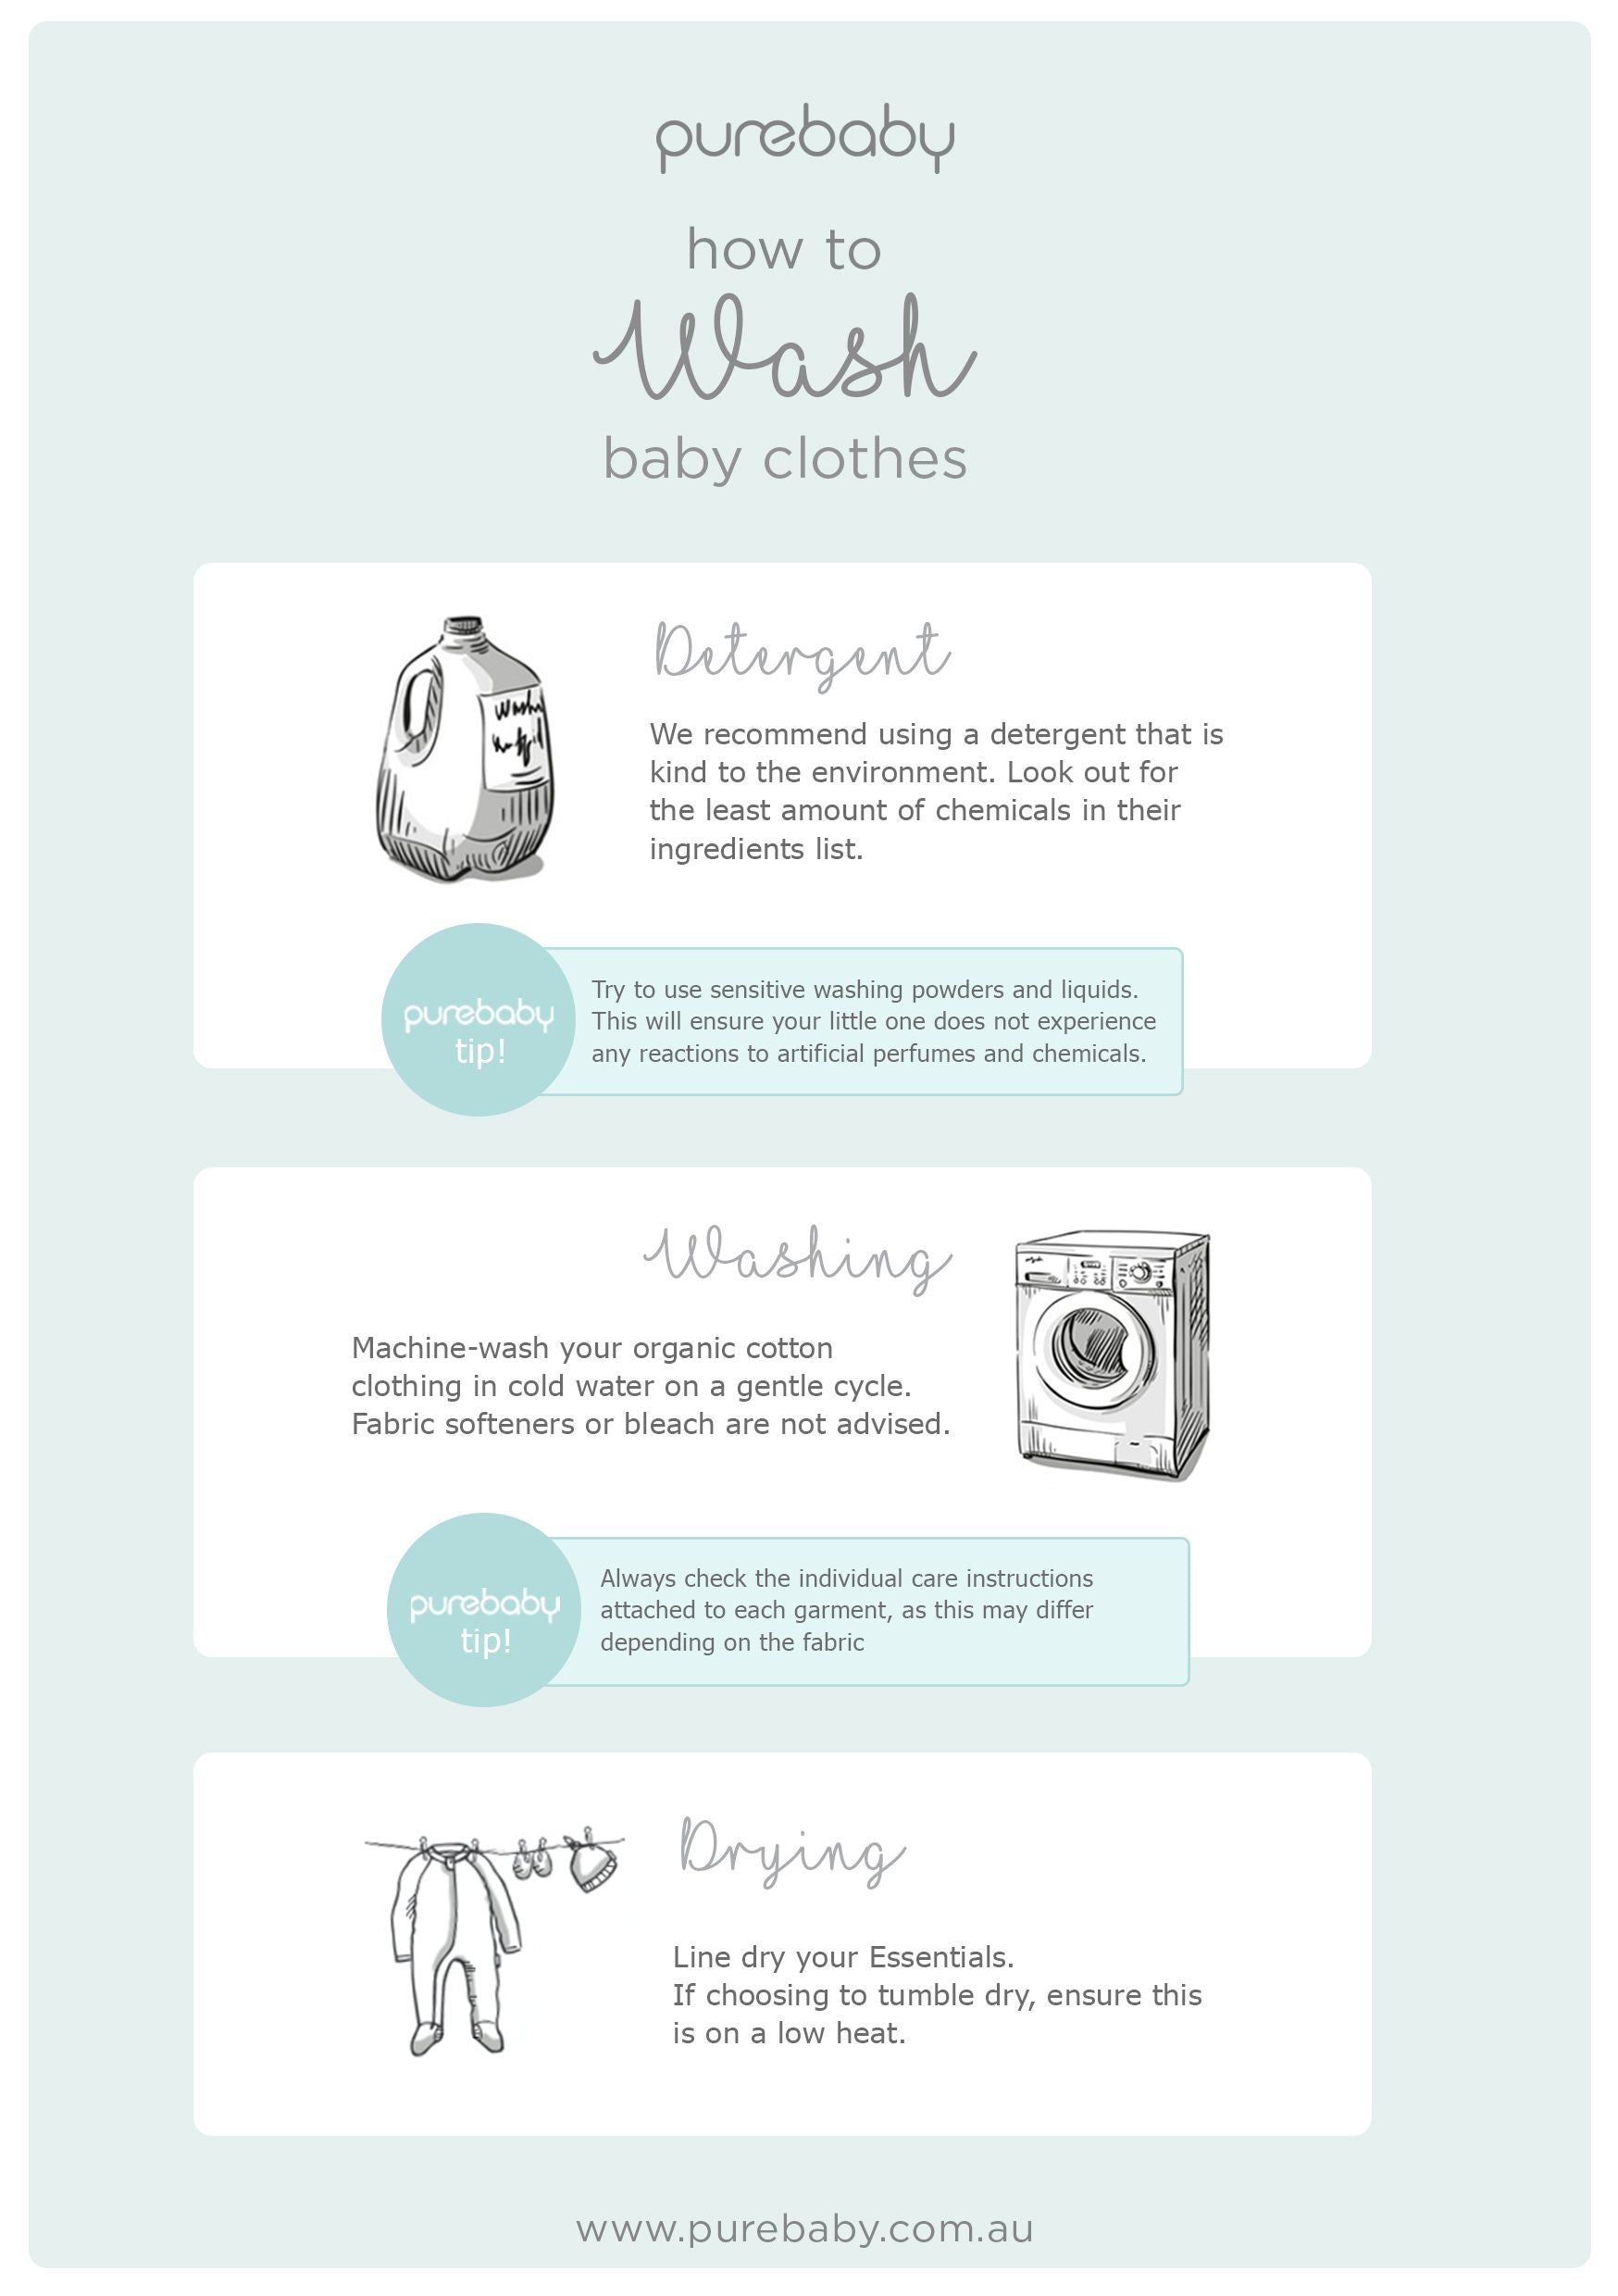 Purebaby infographic illustrating how to wash baby clothes, including detergent, washing and drying